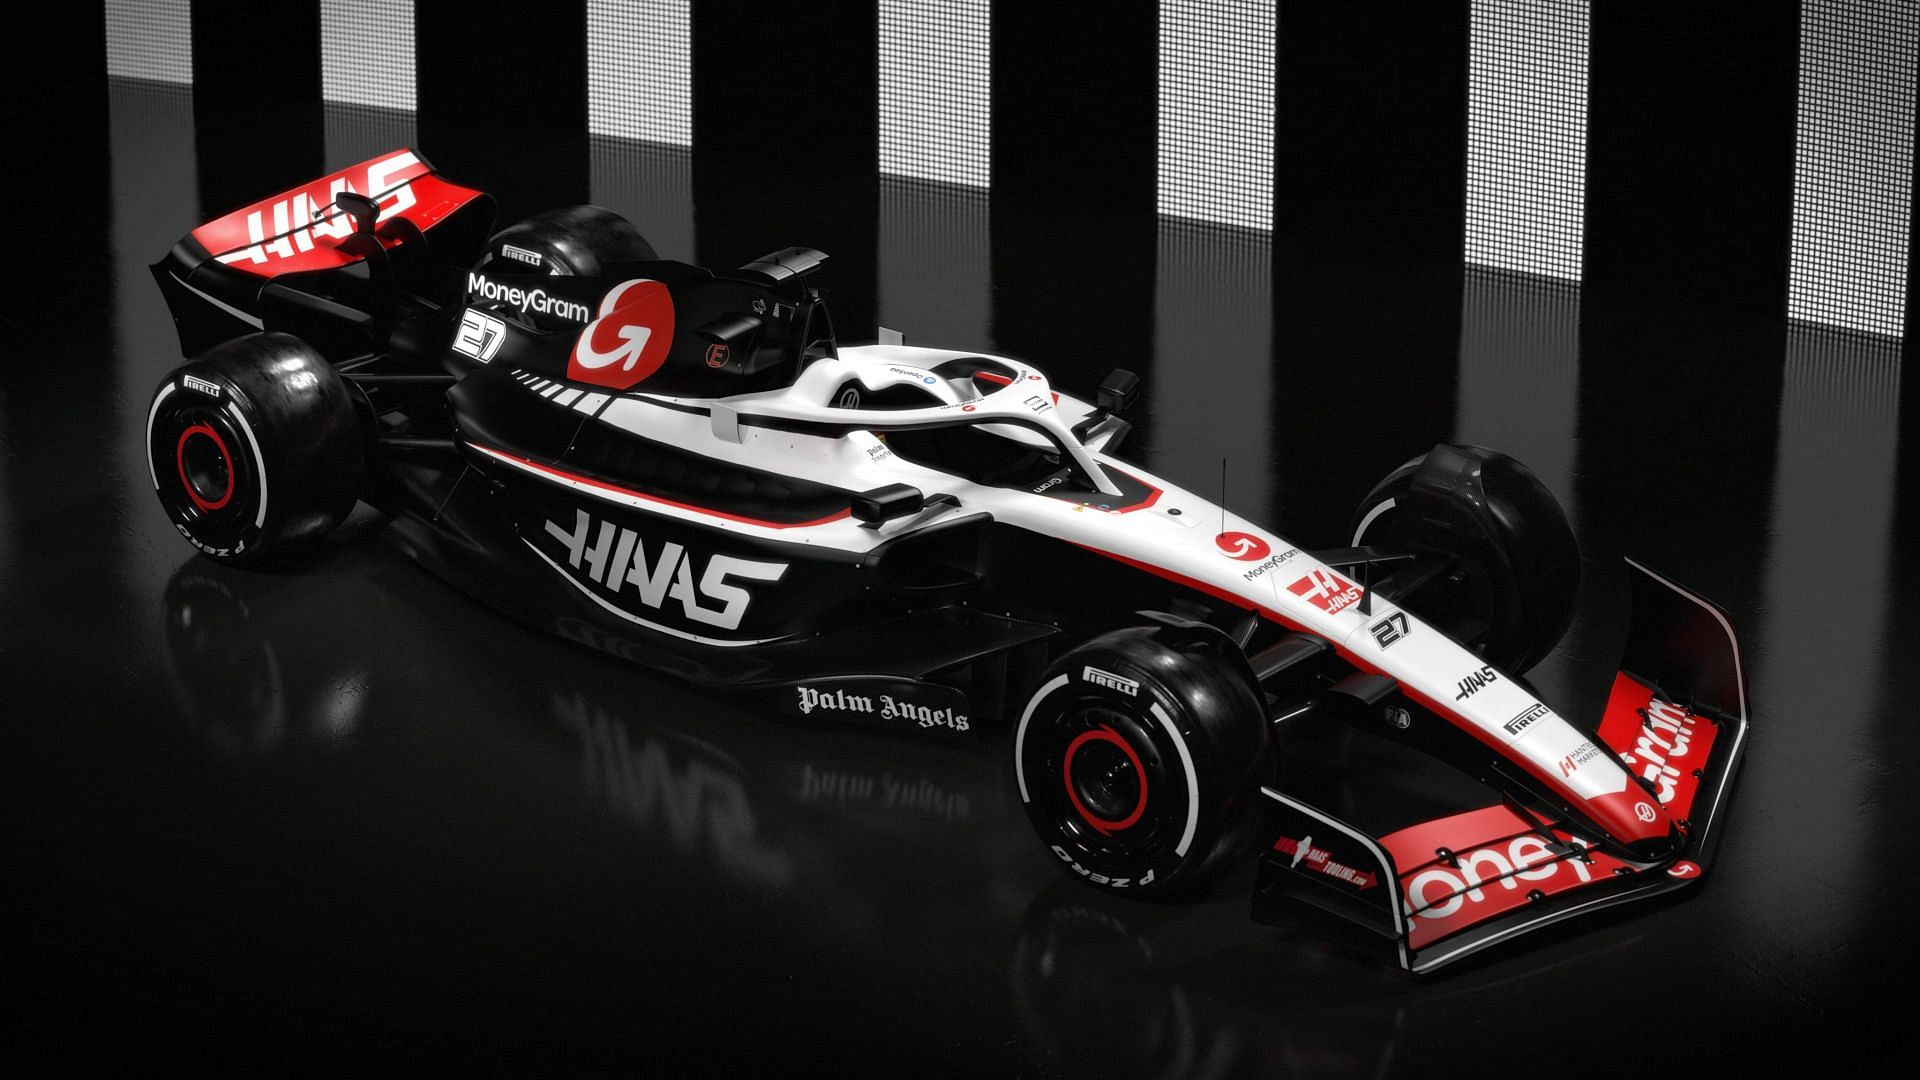 The 2023 Haas livery on the VF-23. Picture taken from @haasF1team on Twitter. 